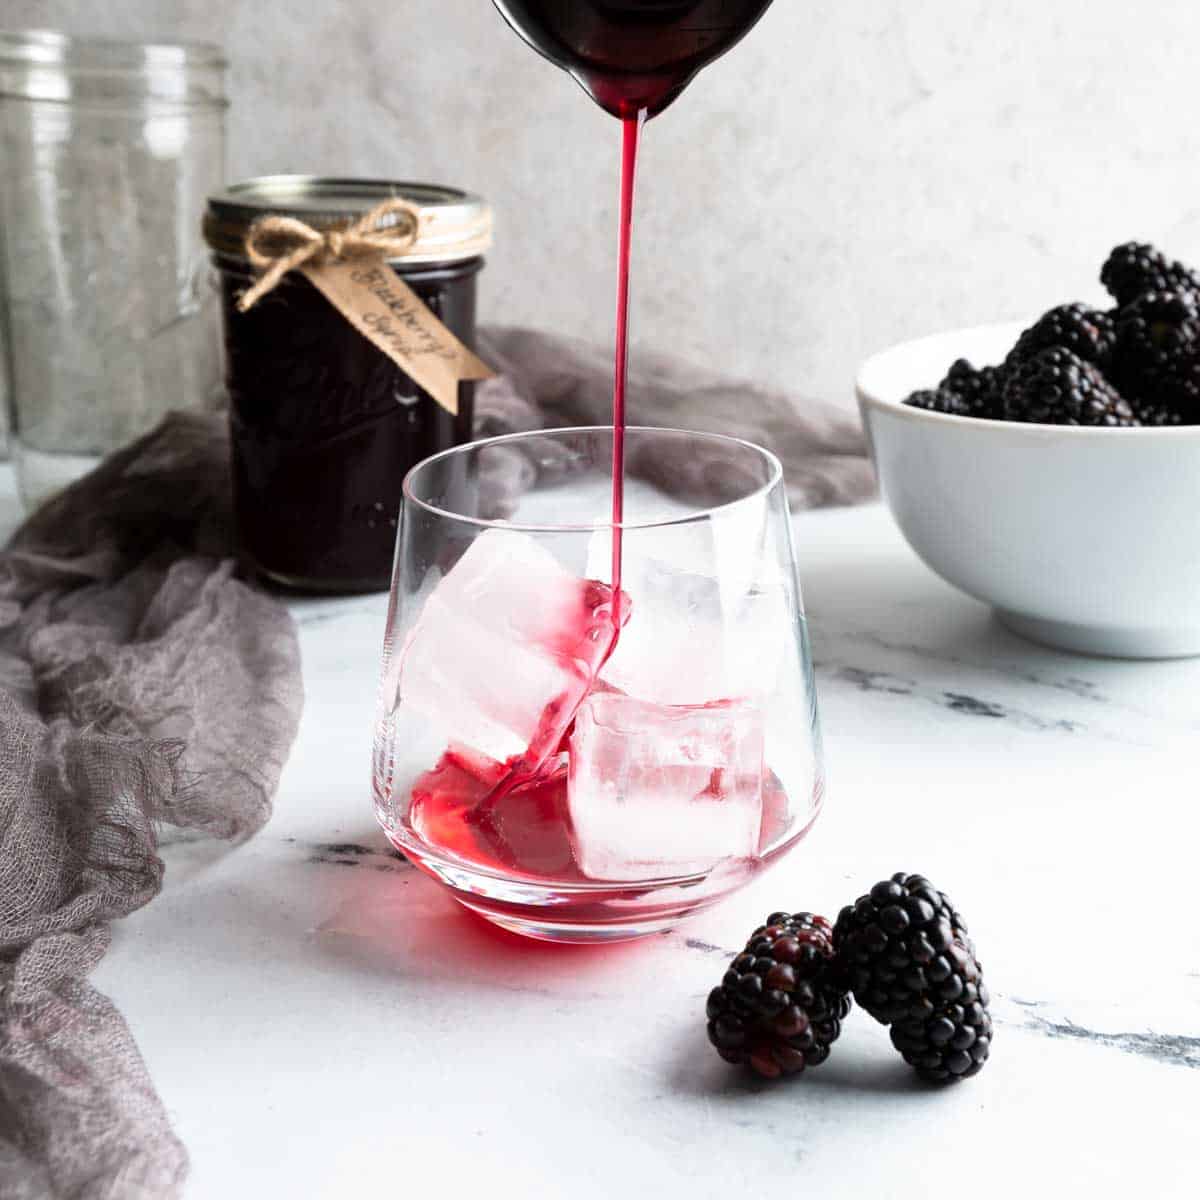 Pouring blackberry syrup in a glass with ice.